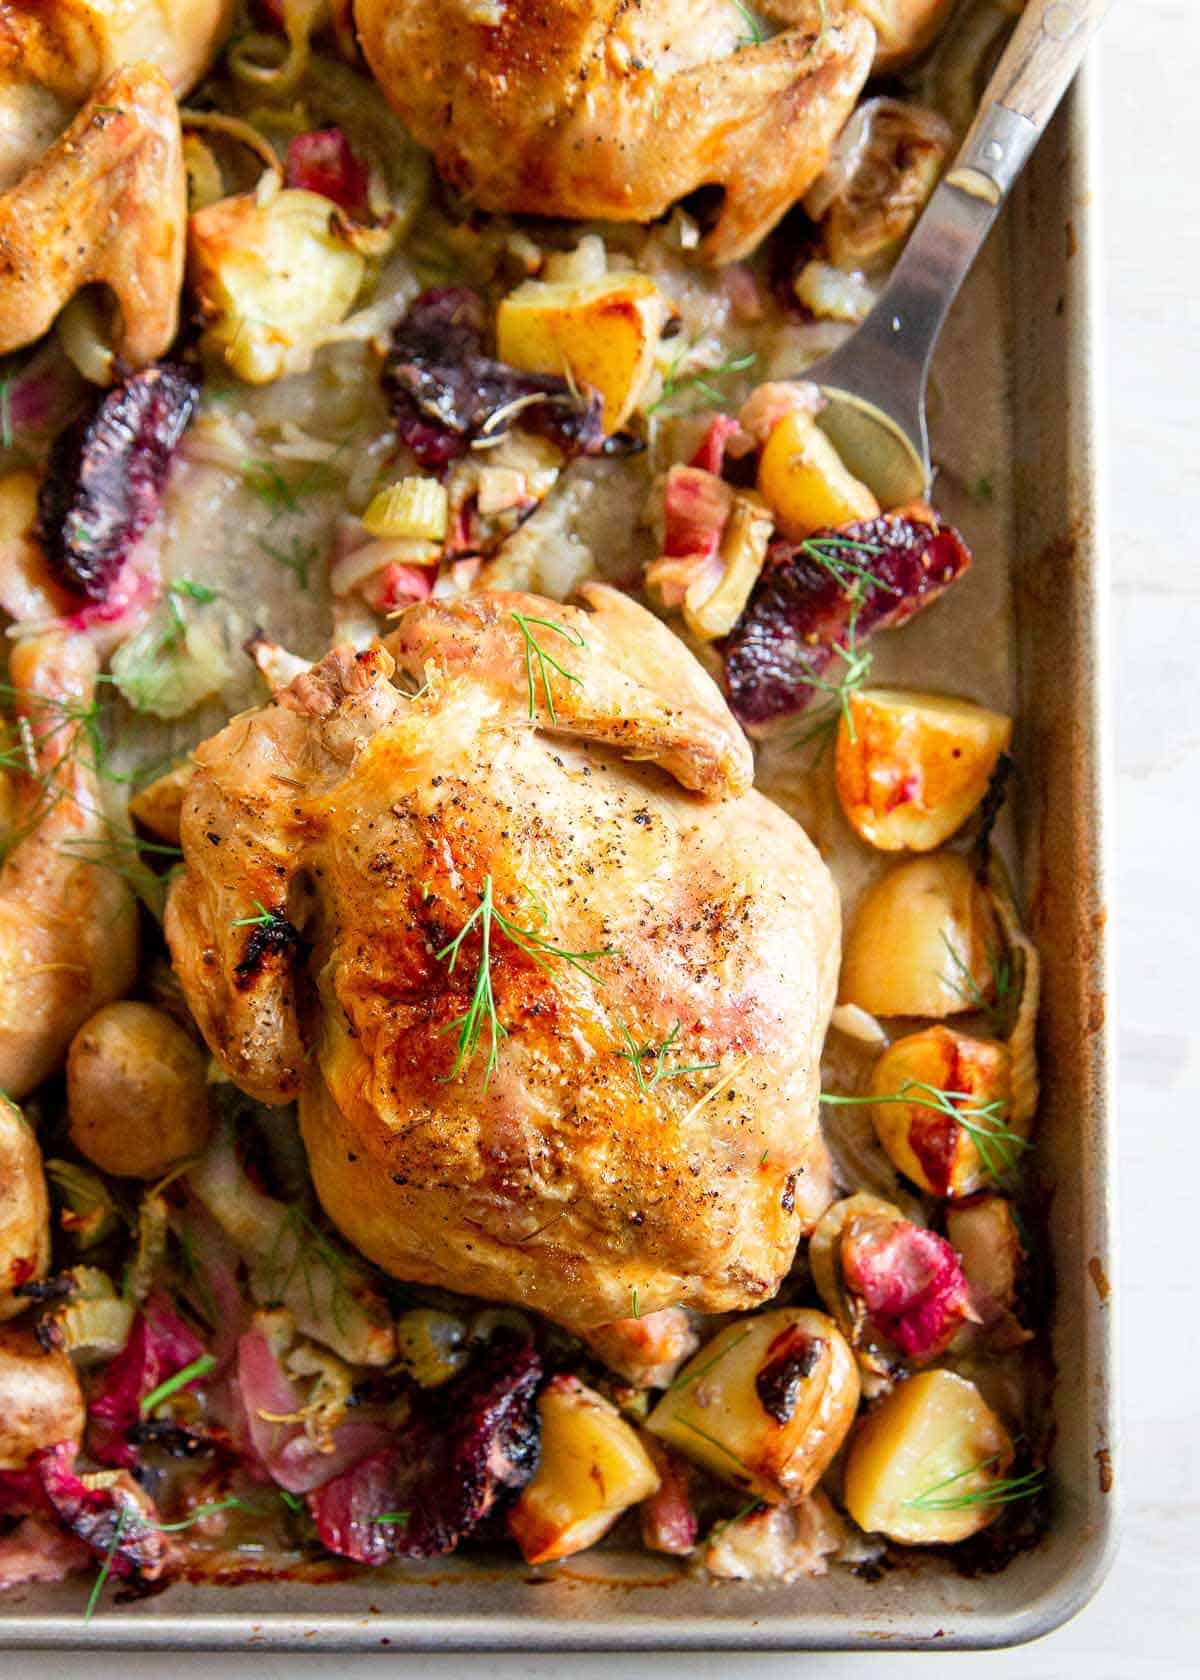 Making Cornish Game Hens is super simple with this sheet pan method. Rhubarb, blood oranges, fennel and potatoes are roasted with the Cornish Hens all on one pan for an easy spring dinner versatile enough for a weeknight or a holiday!